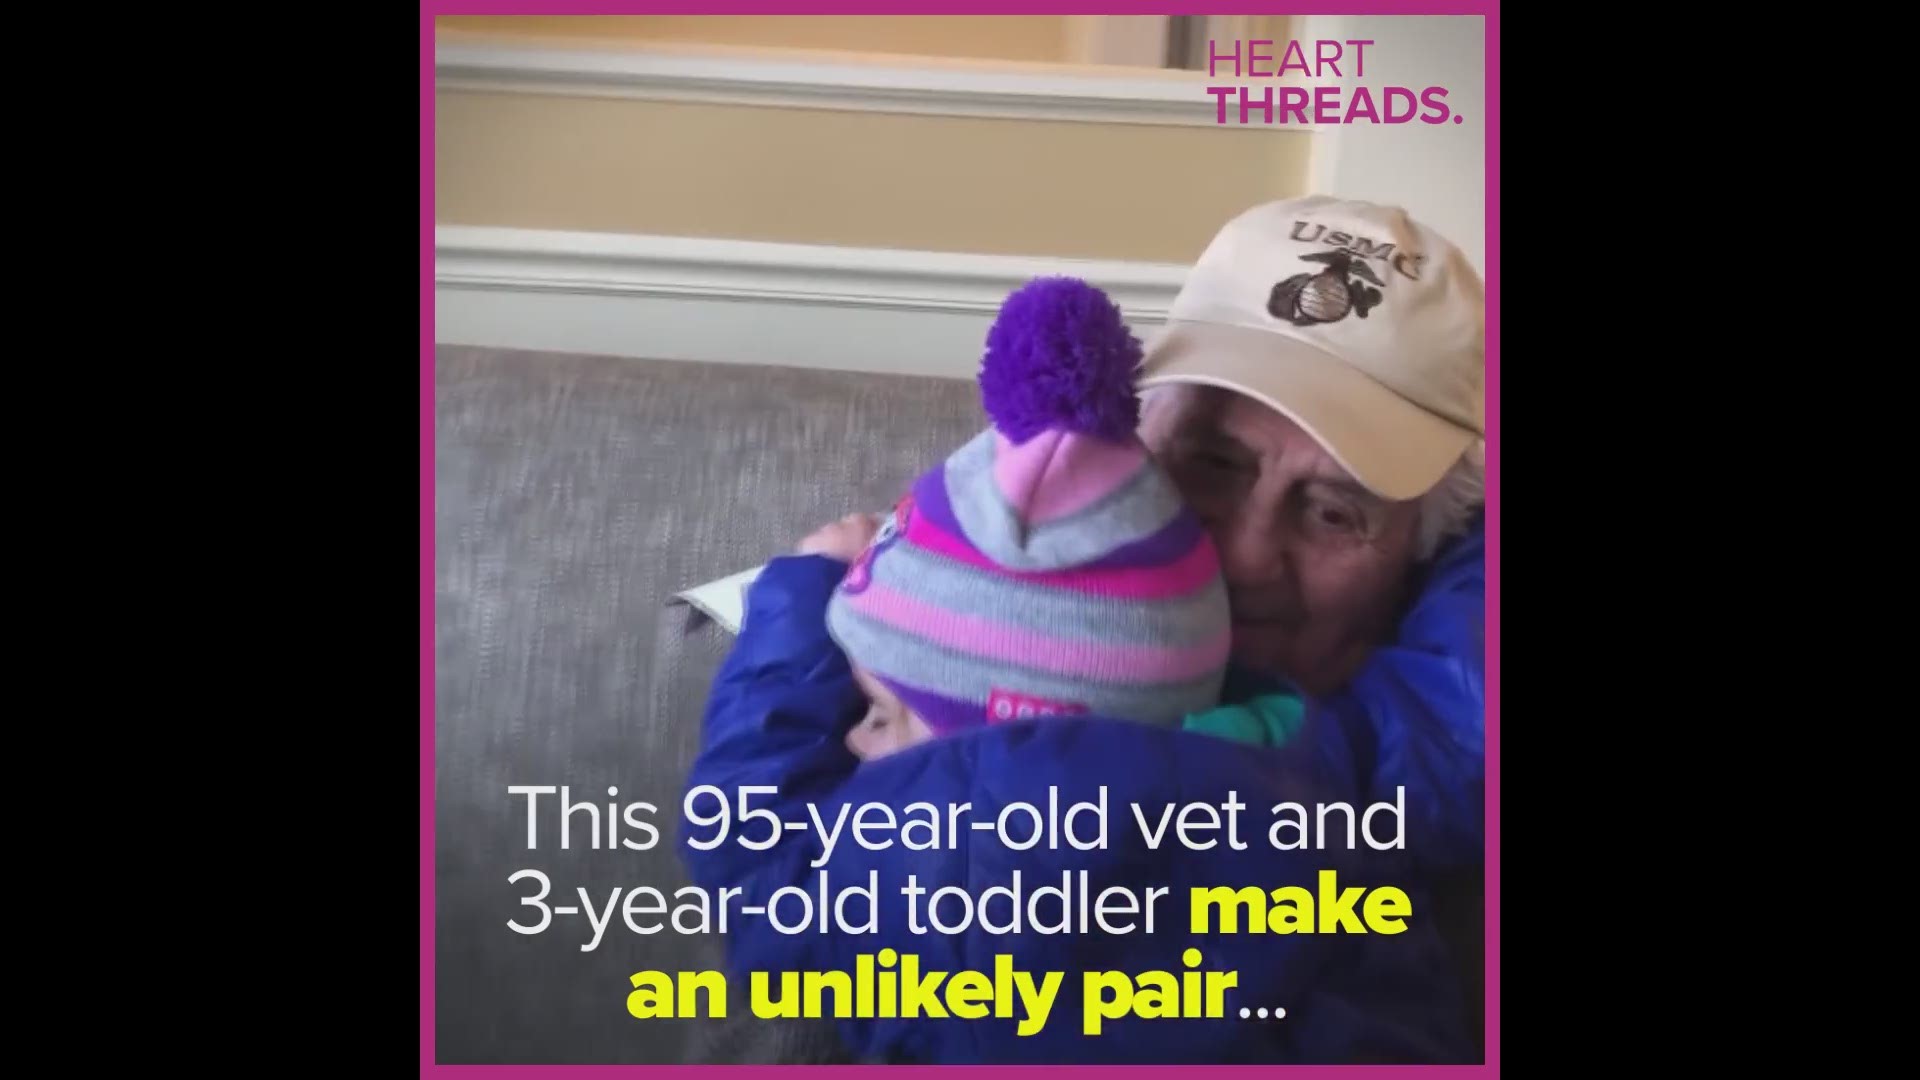 A WWII veteran with dementia found an unlikely friend in the form of a 3-year-old toddler.